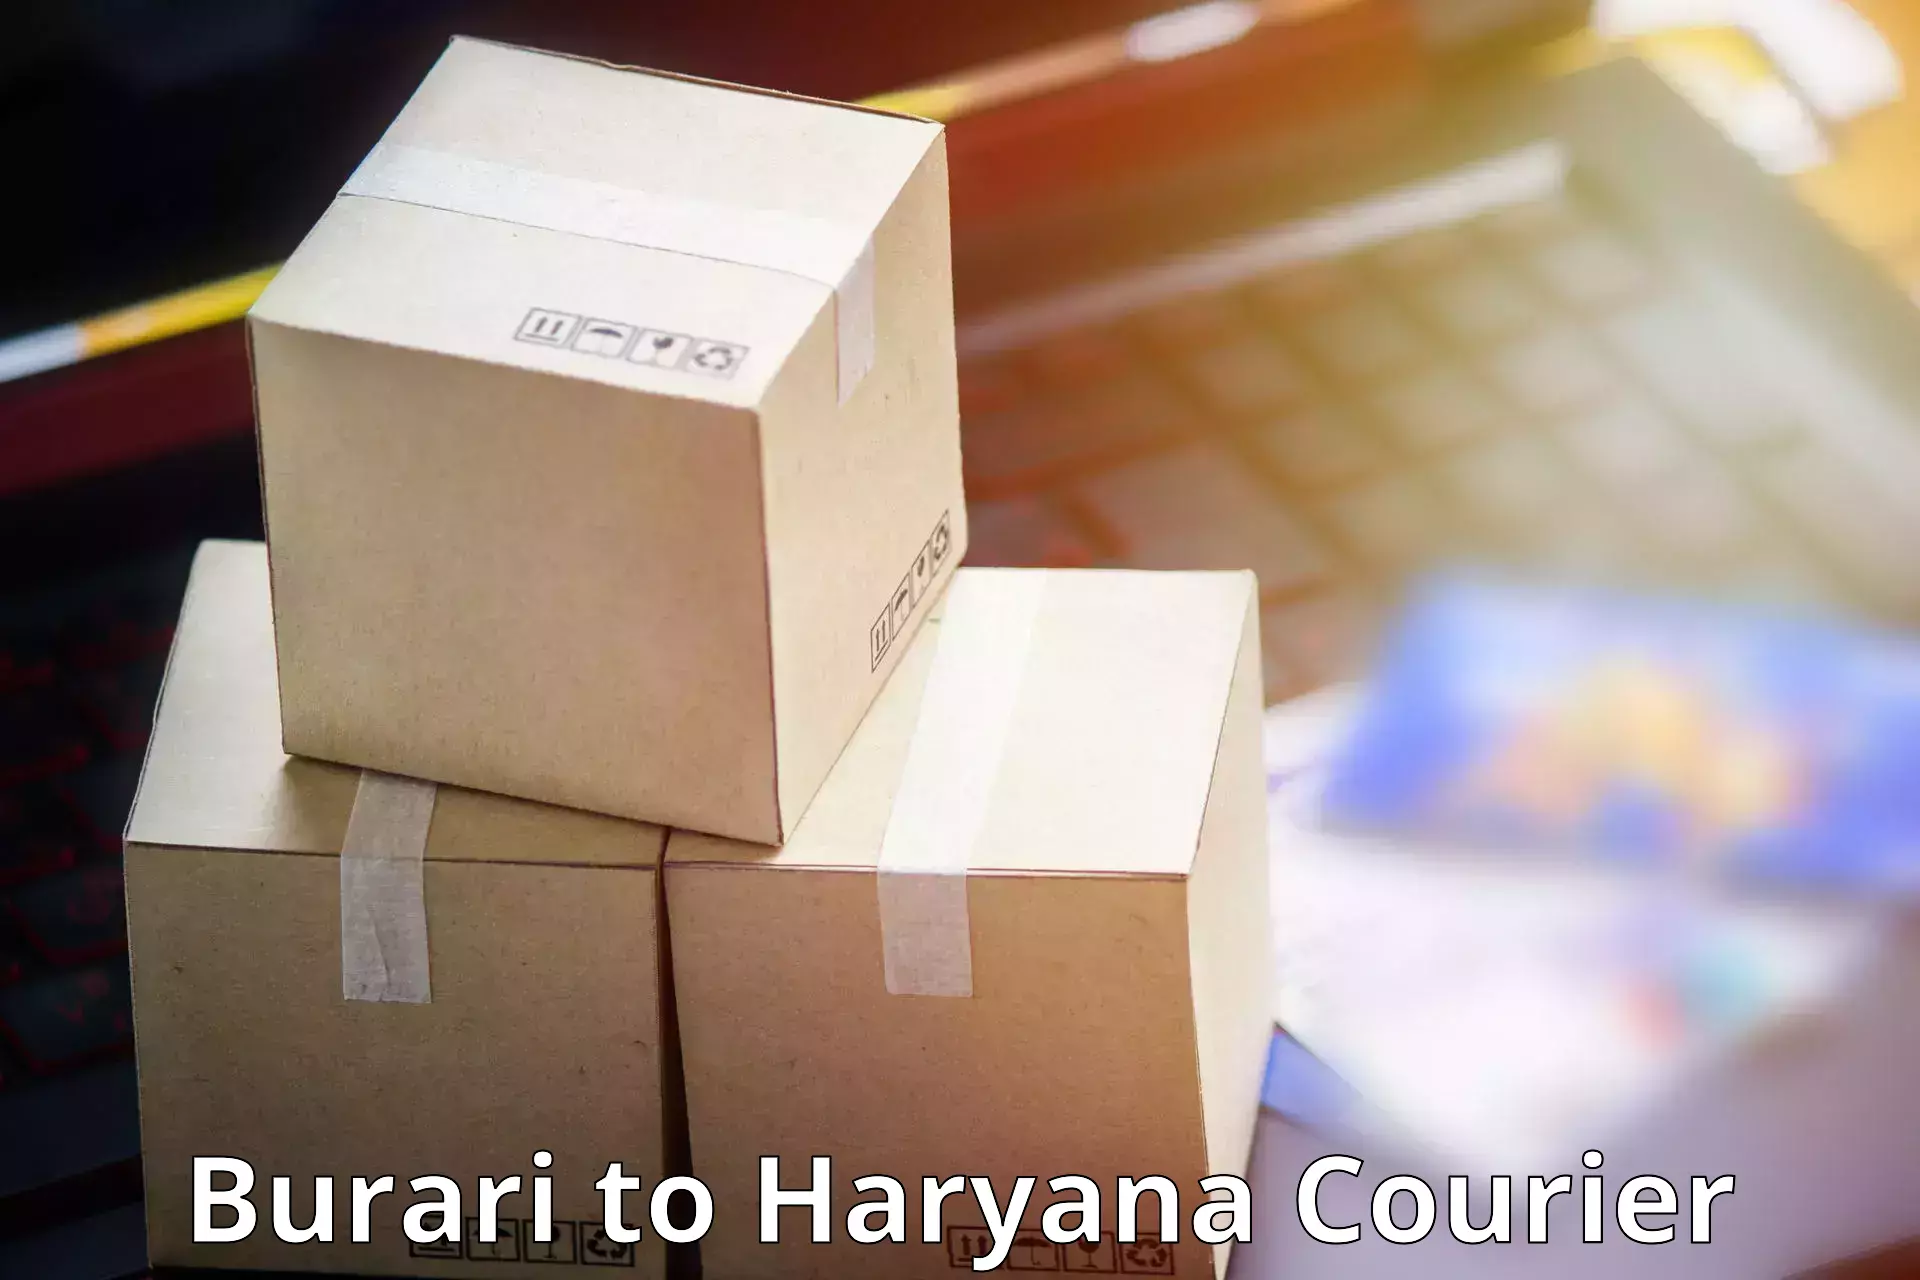 24-hour delivery options in Burari to Gurgaon